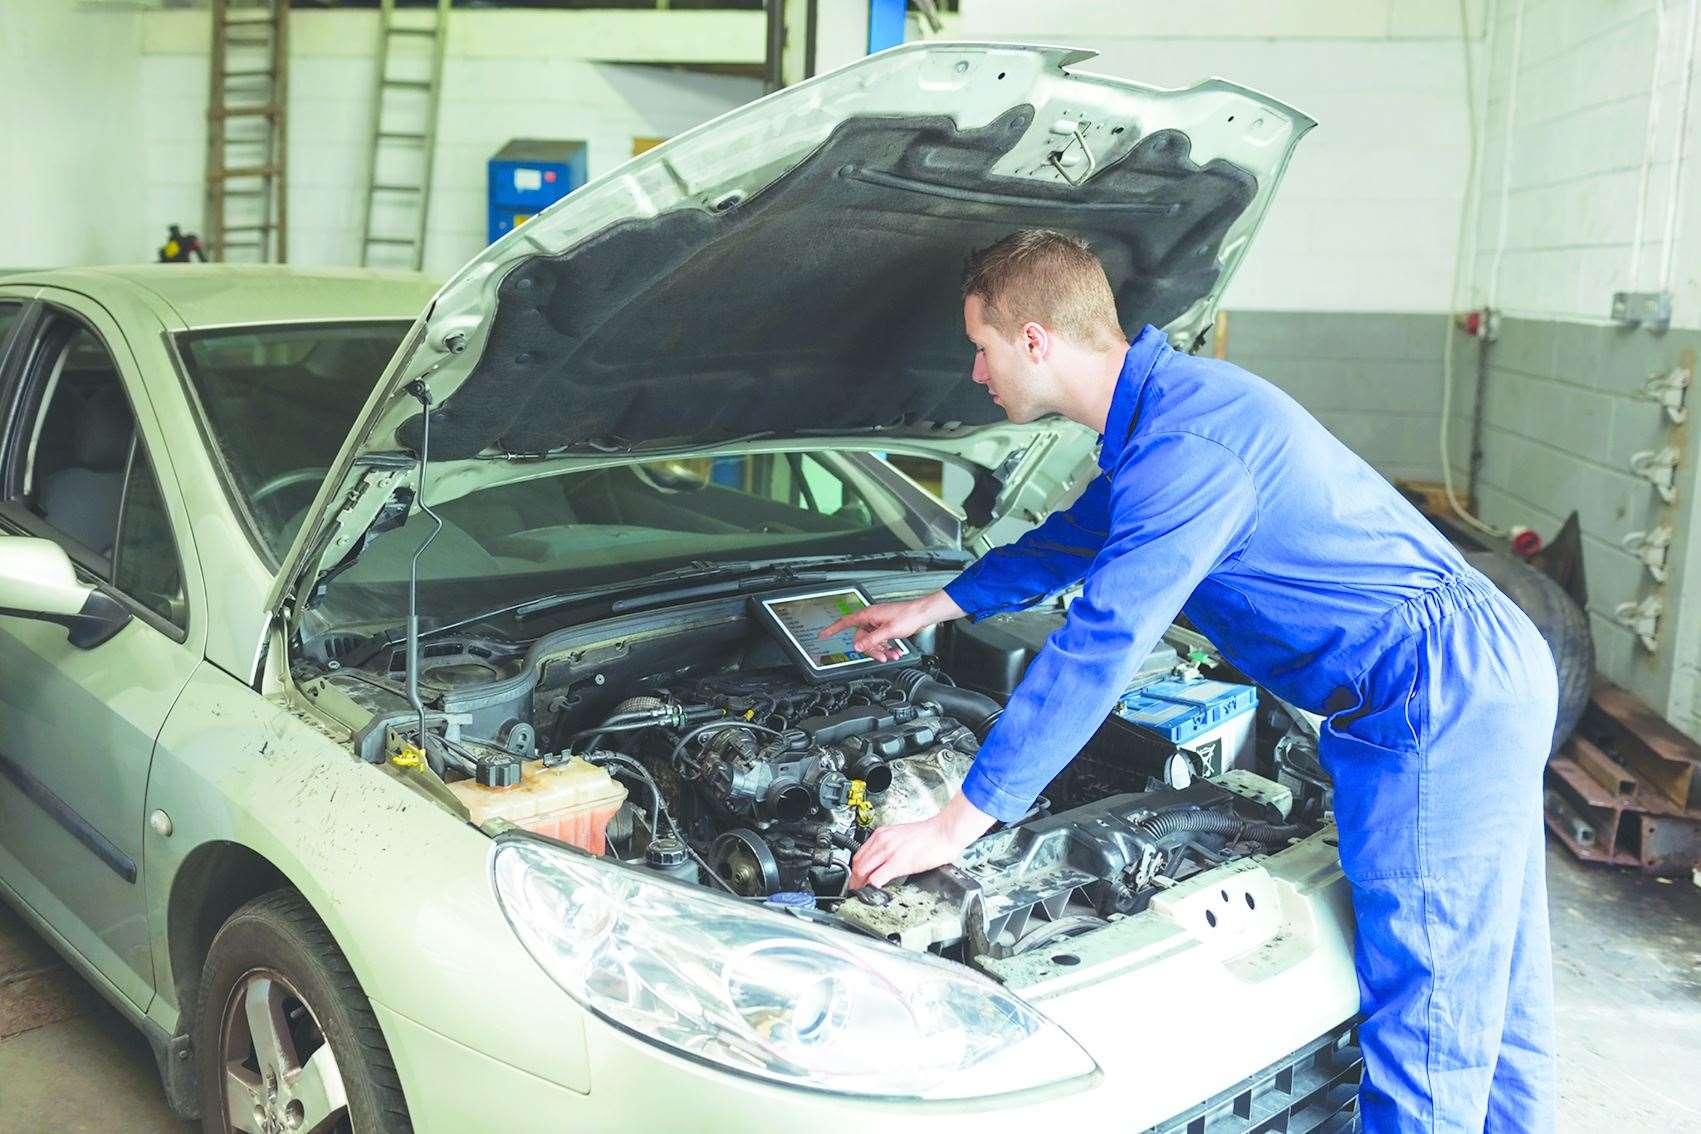 Faults with your car can affect emissions so regular servicing is important